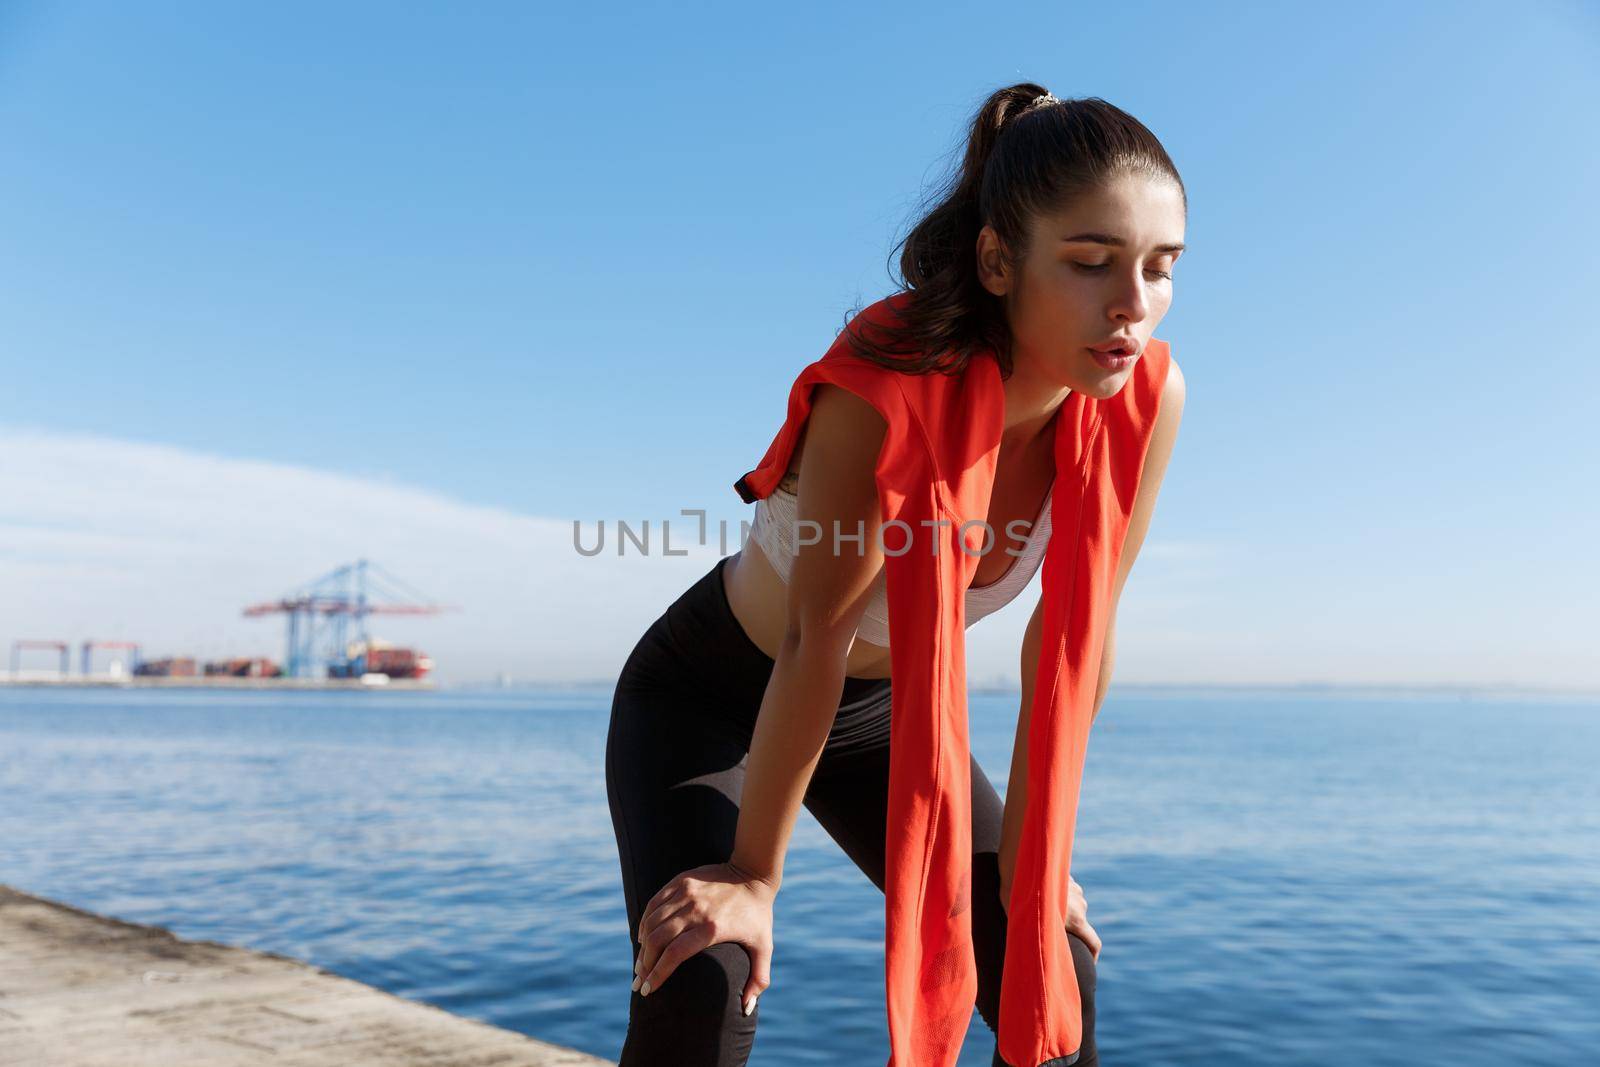 Outdoor shot of tired fitness woman panting and taking a breath after jogging, standing on a pier with sea behind her.